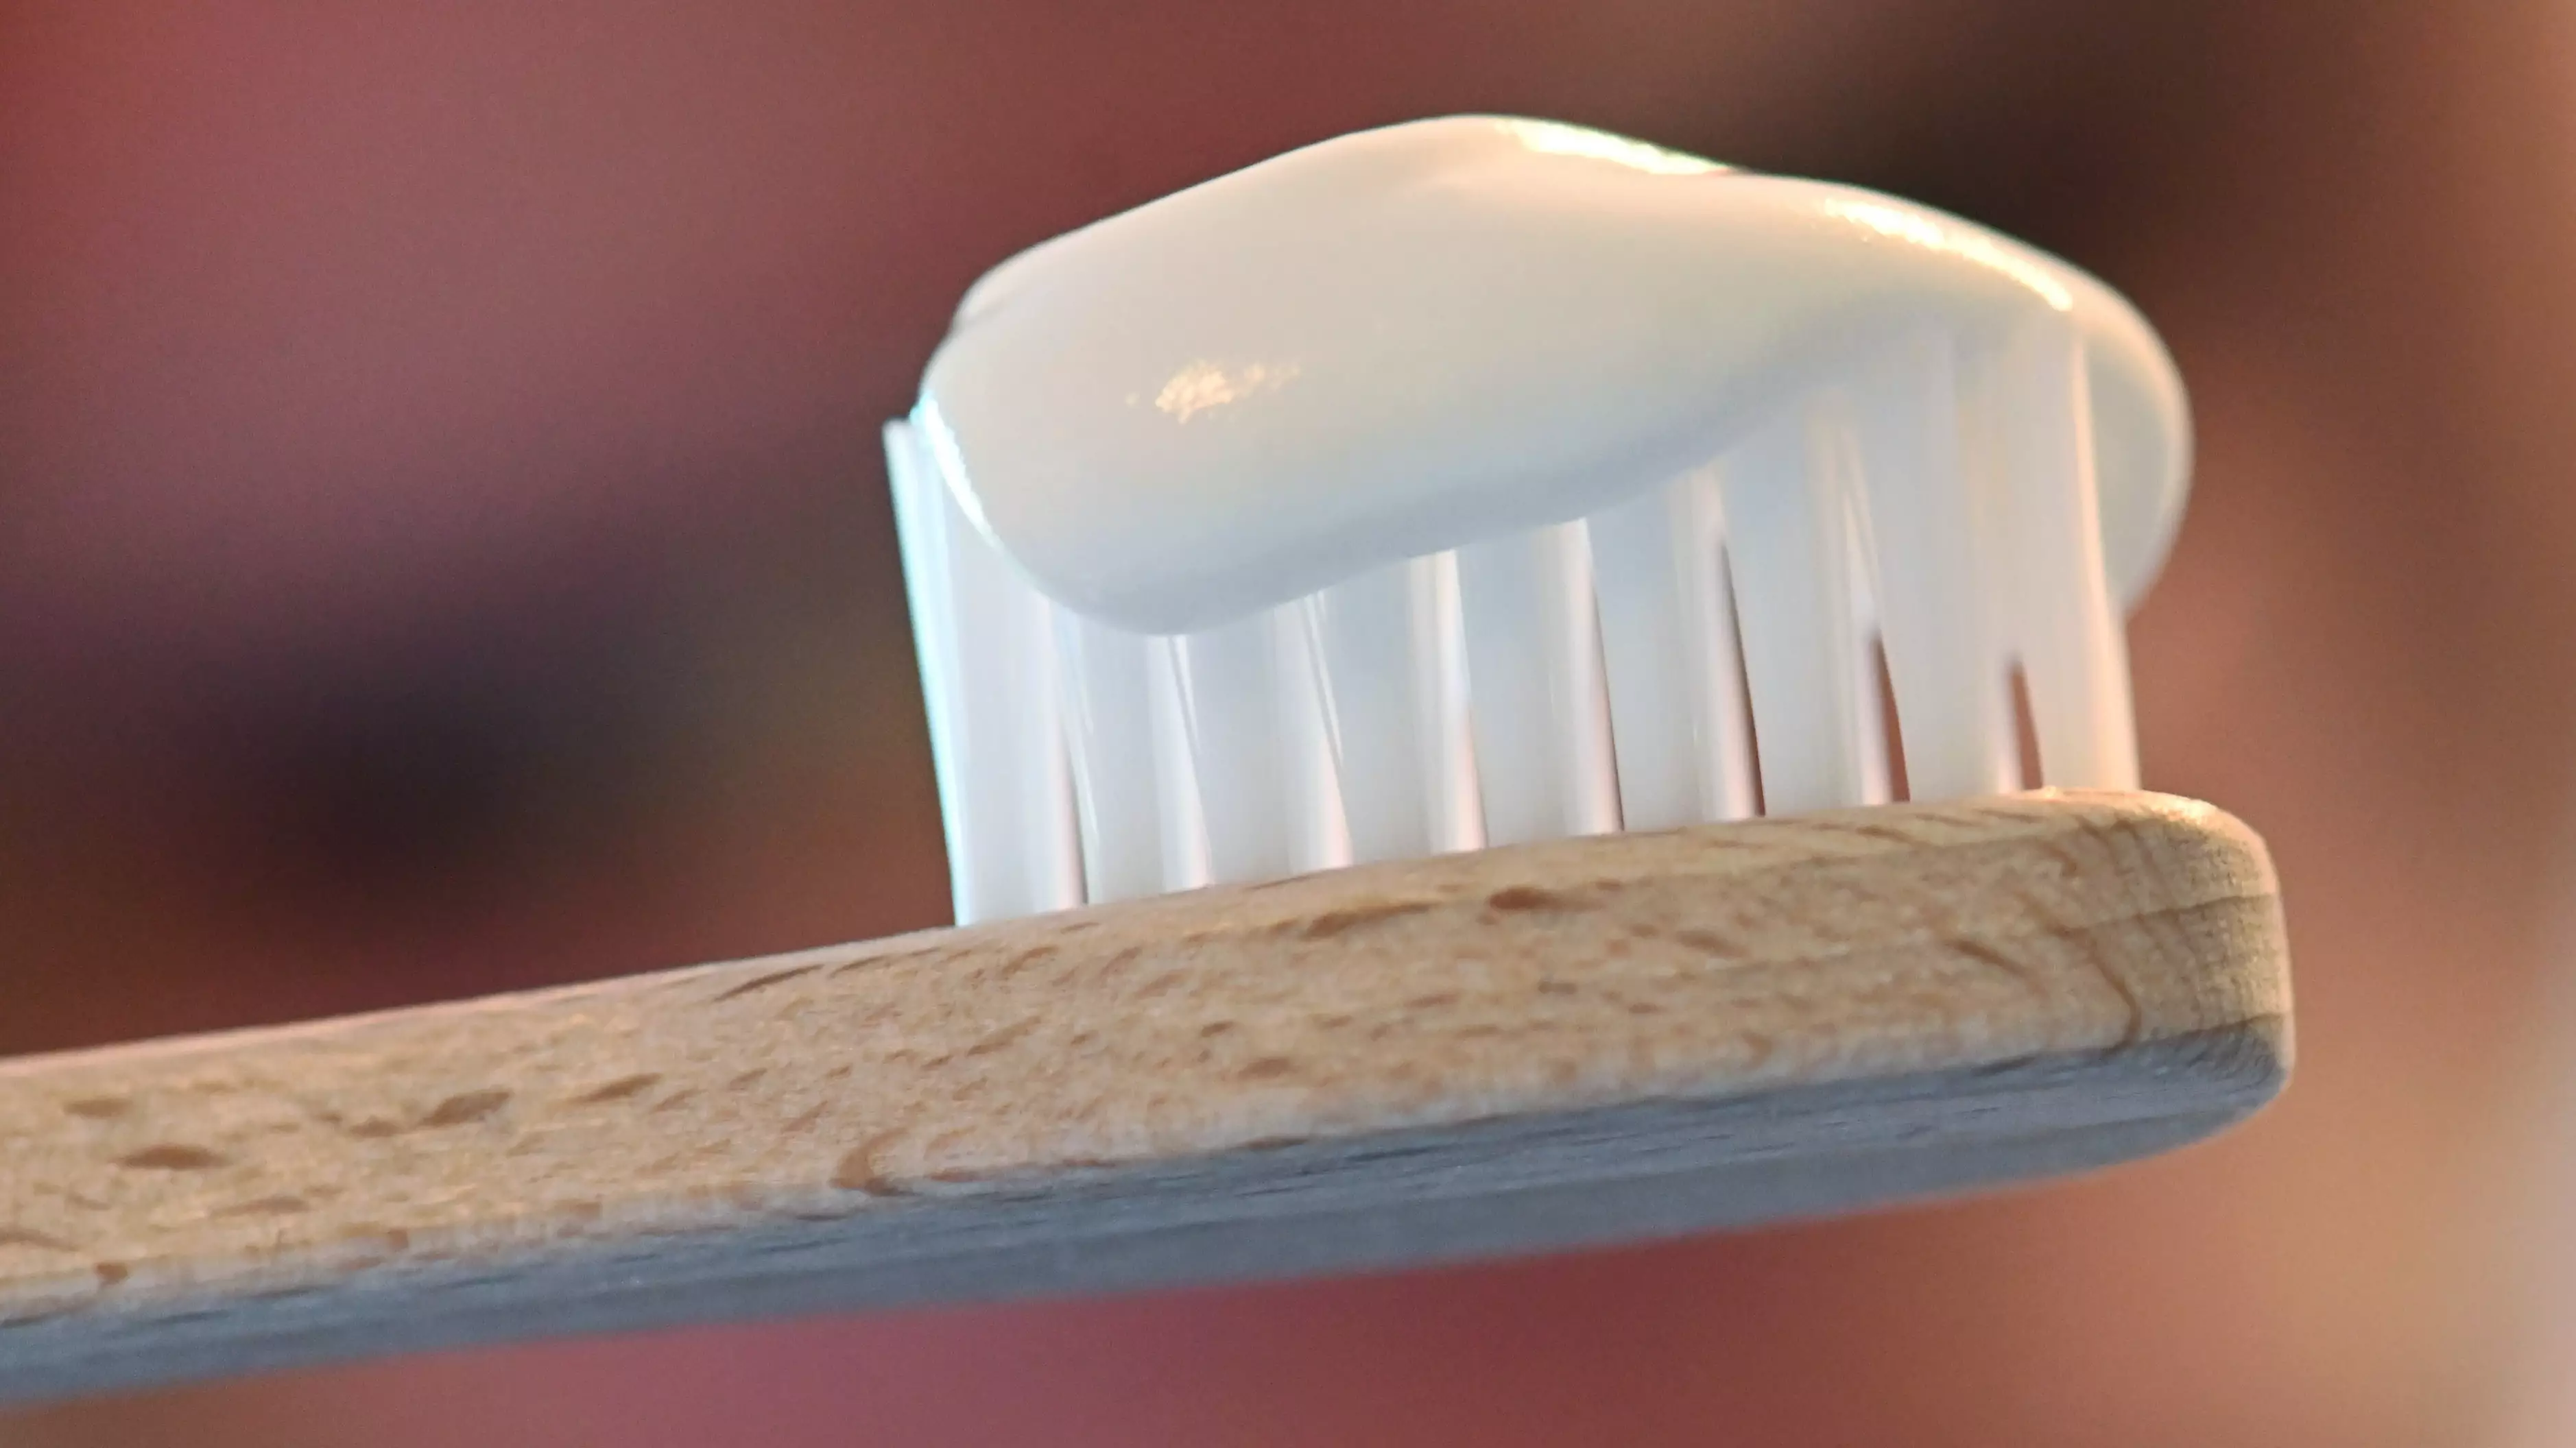 Brushing Twice A Day Won't Necessarily Make Your Teeth Whiter